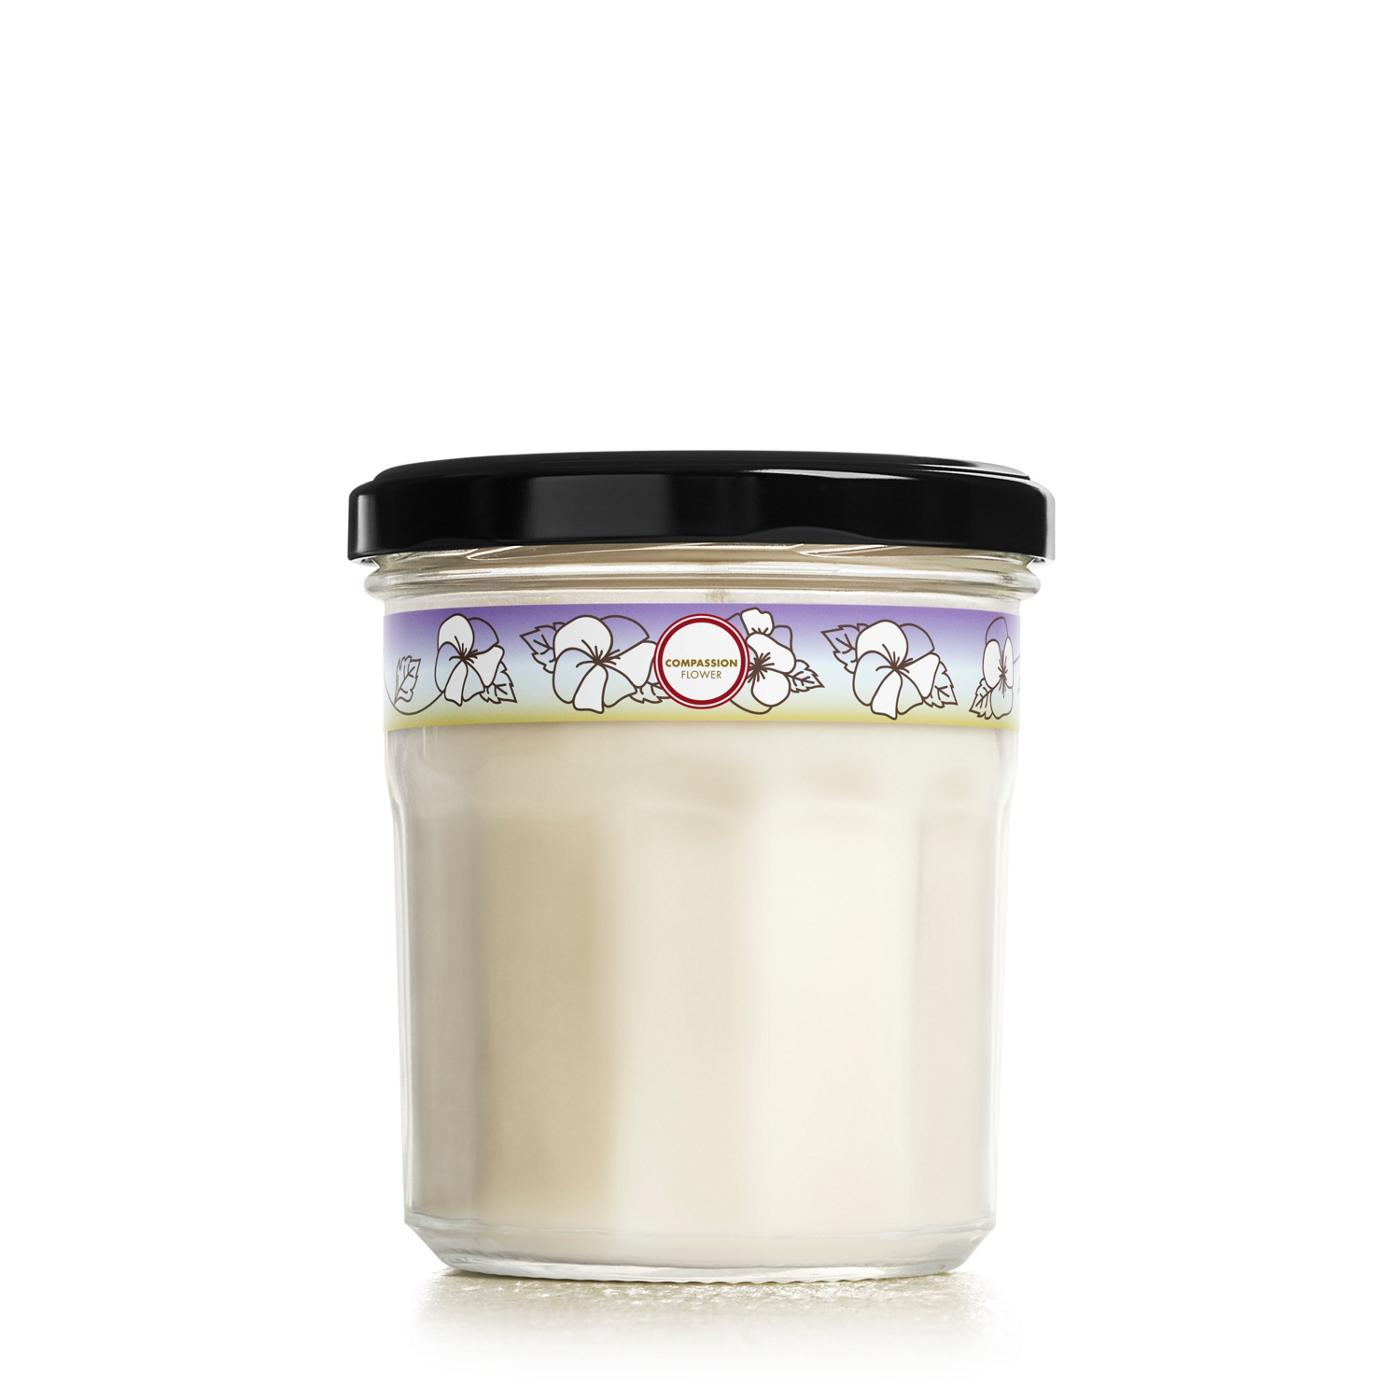 Mrs. Meyer's Clean Day Compassion Flower Scented Soy Candle; image 1 of 3